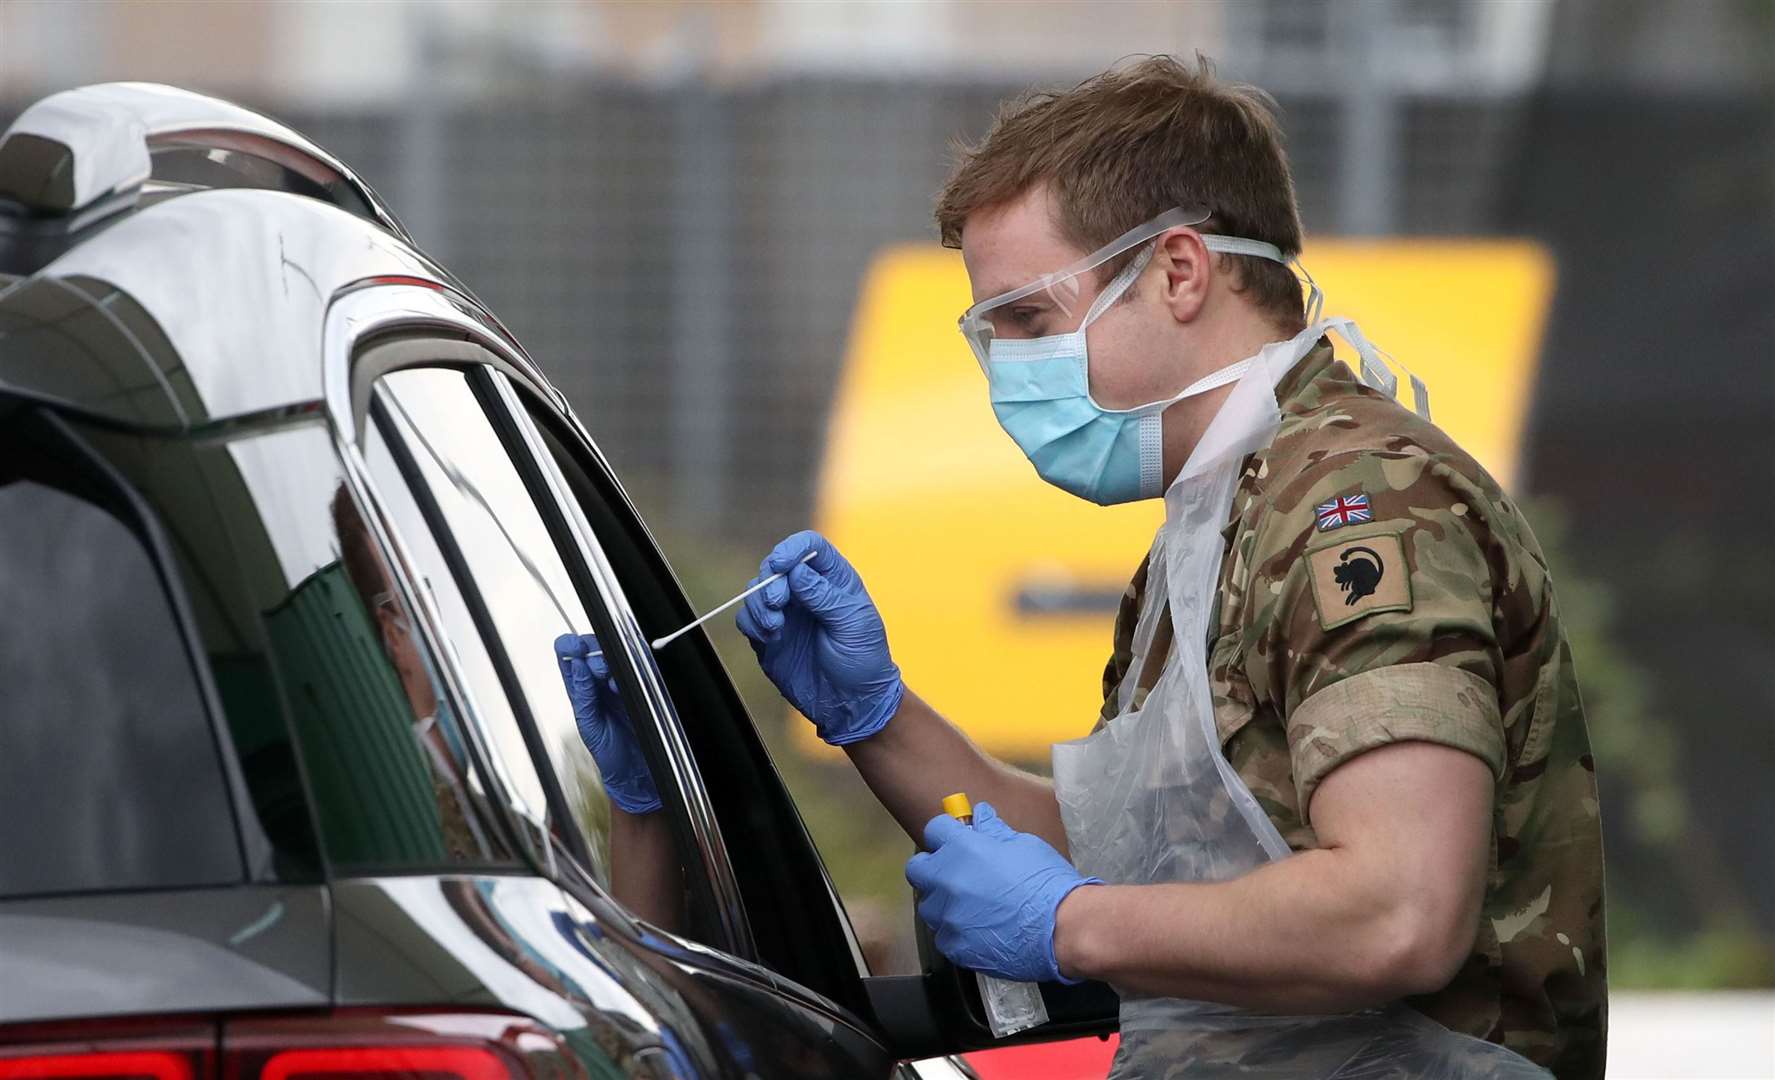 TESTING TIME: A member of the armed services carries out a swab to detect Covid-19